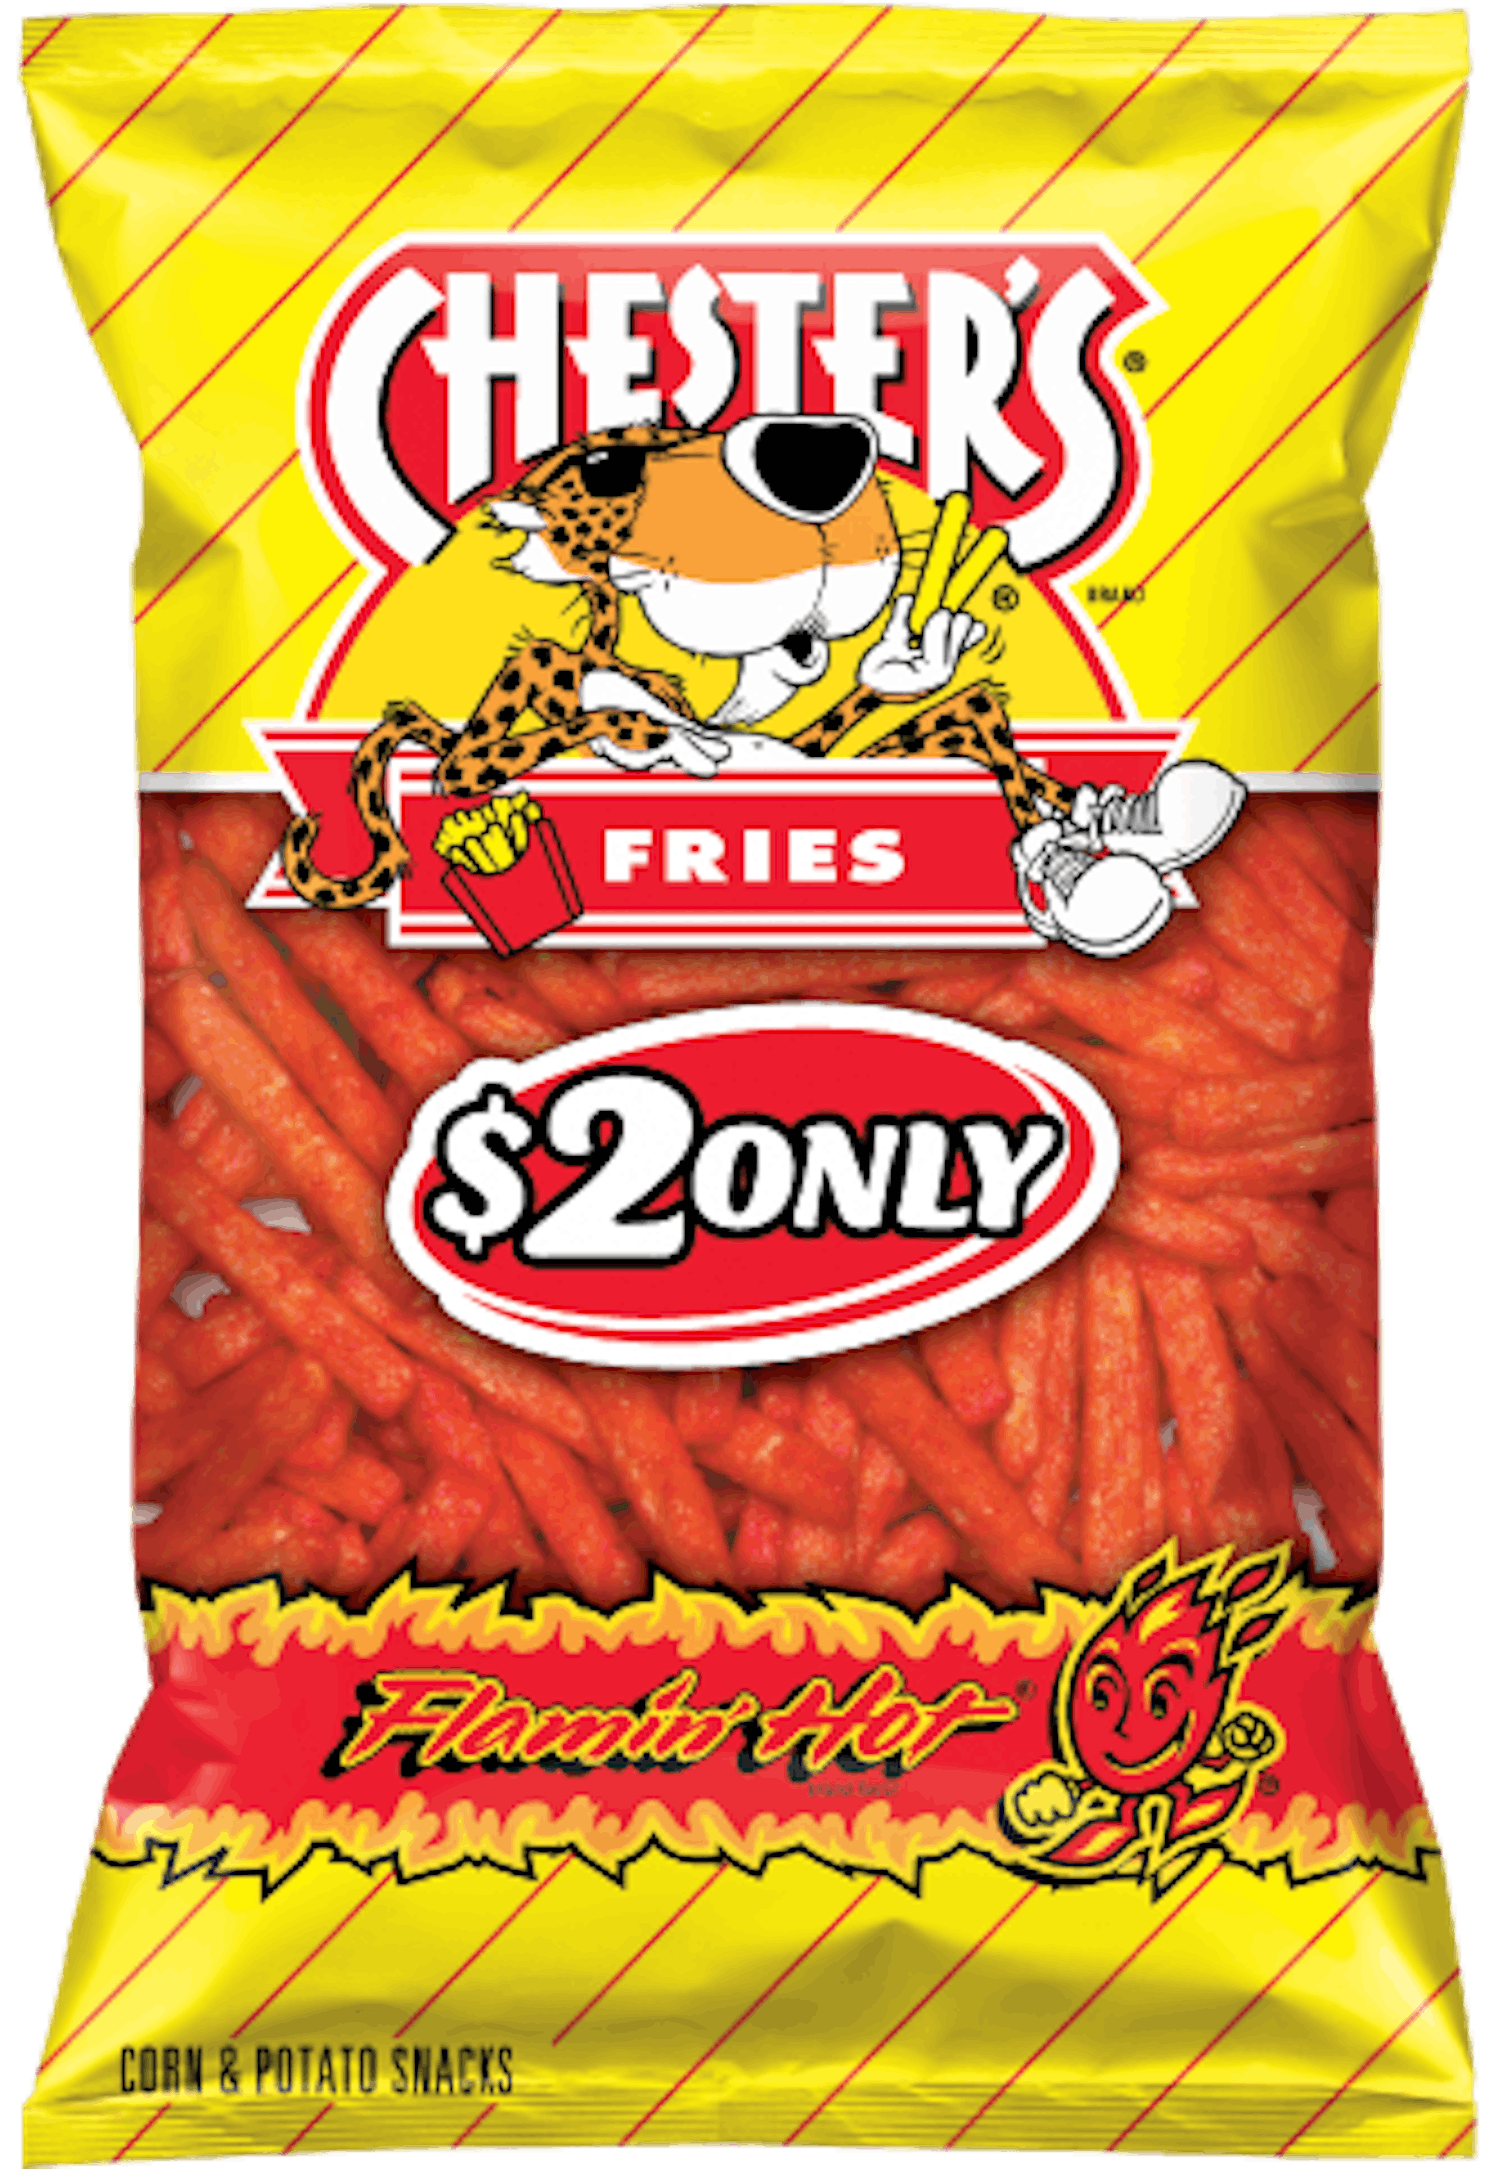 In this week's edition of the Picks column, assistant sports editor Dylan Dixon makes the argument that you should order Chester's Hot Fries from 352delivery.com.&nbsp;